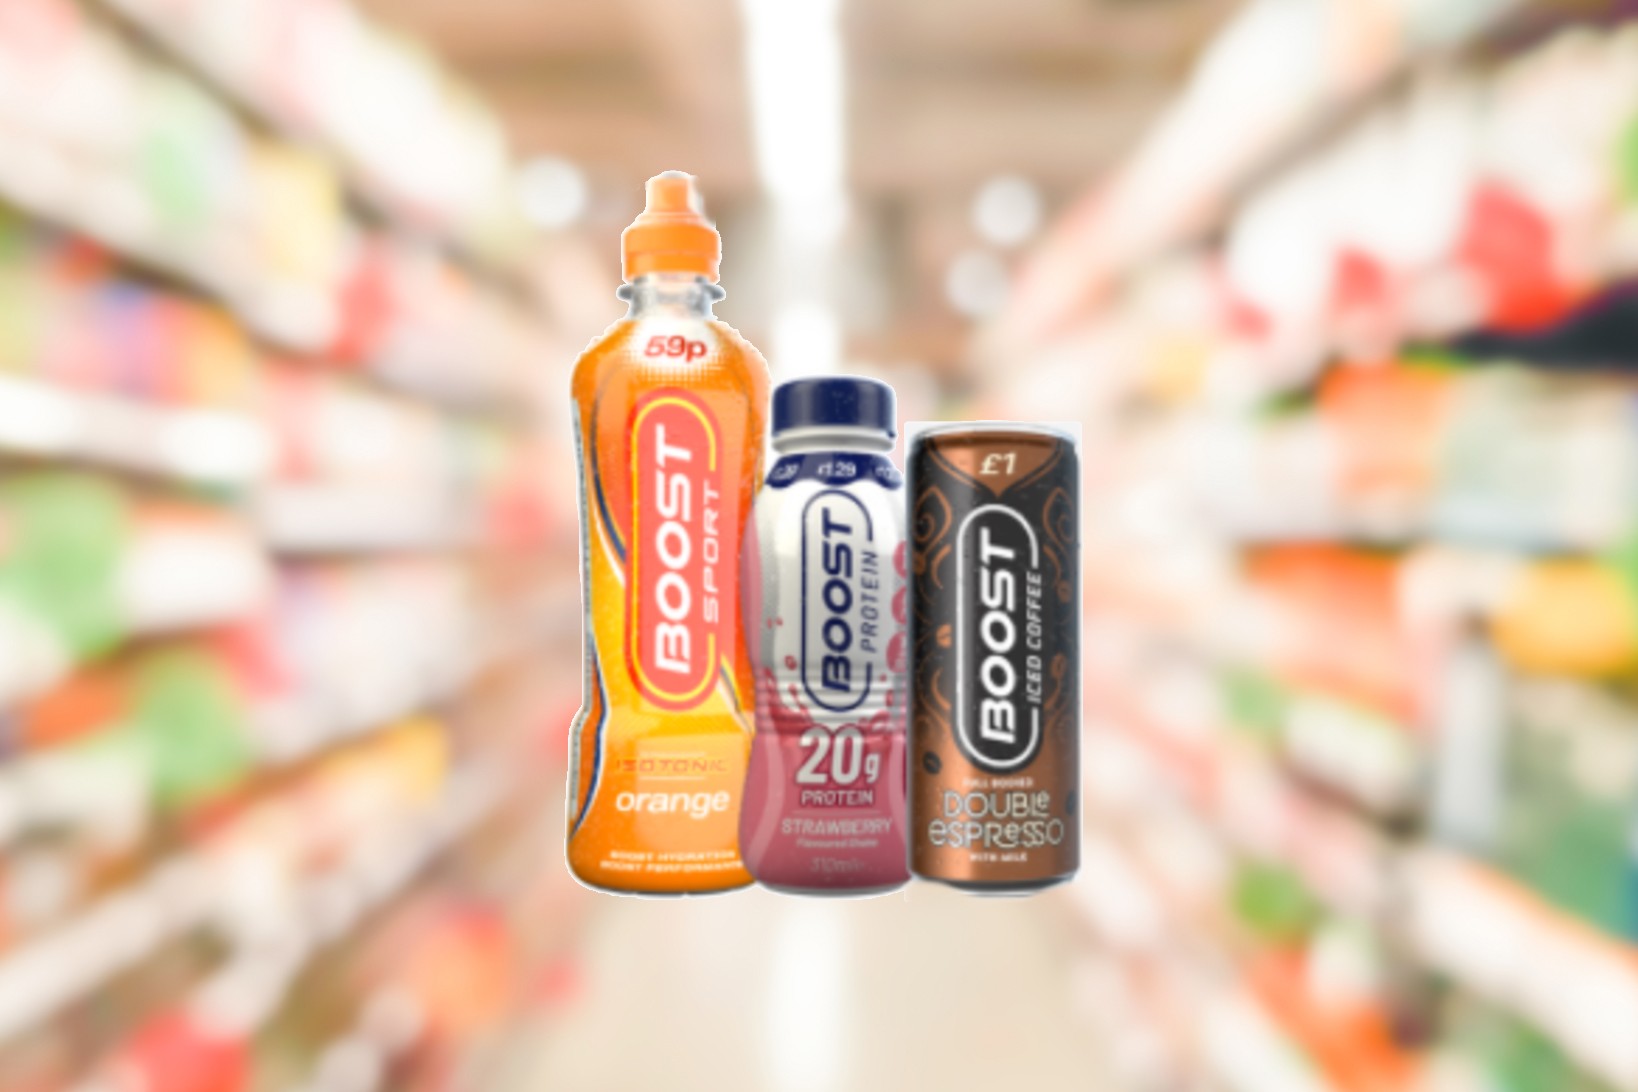 Boost Drinks injects £1.2m behind biggest campaign to date